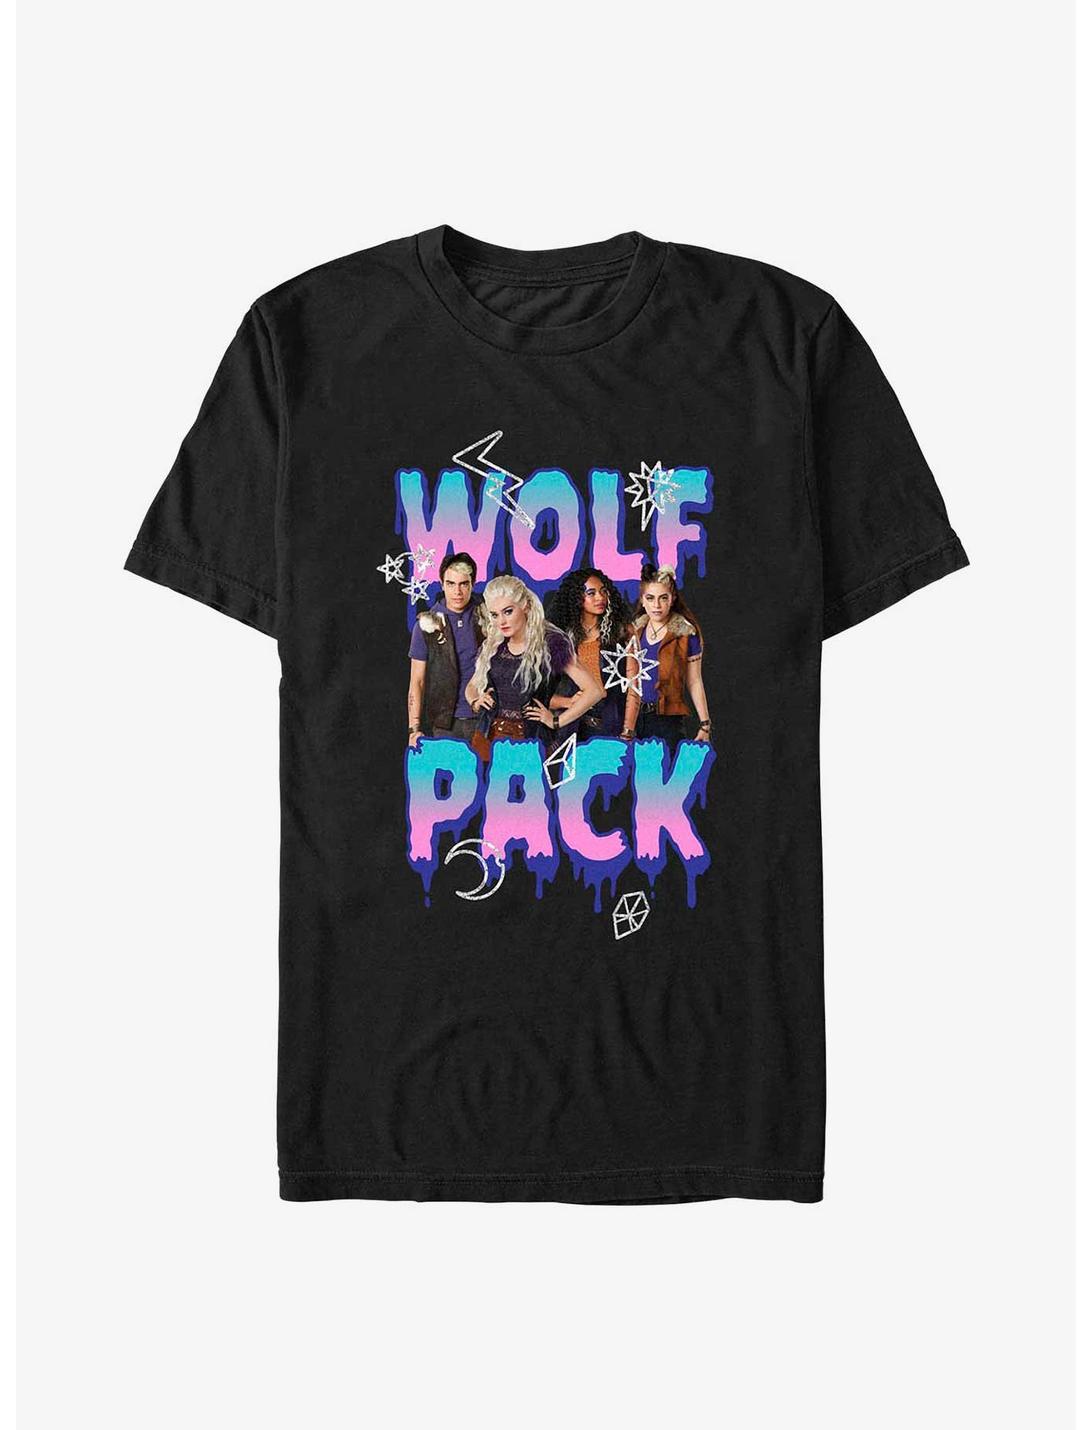 Disney Zombies Wolf Pack Zombies T-Shirt, BLACK, hi-res